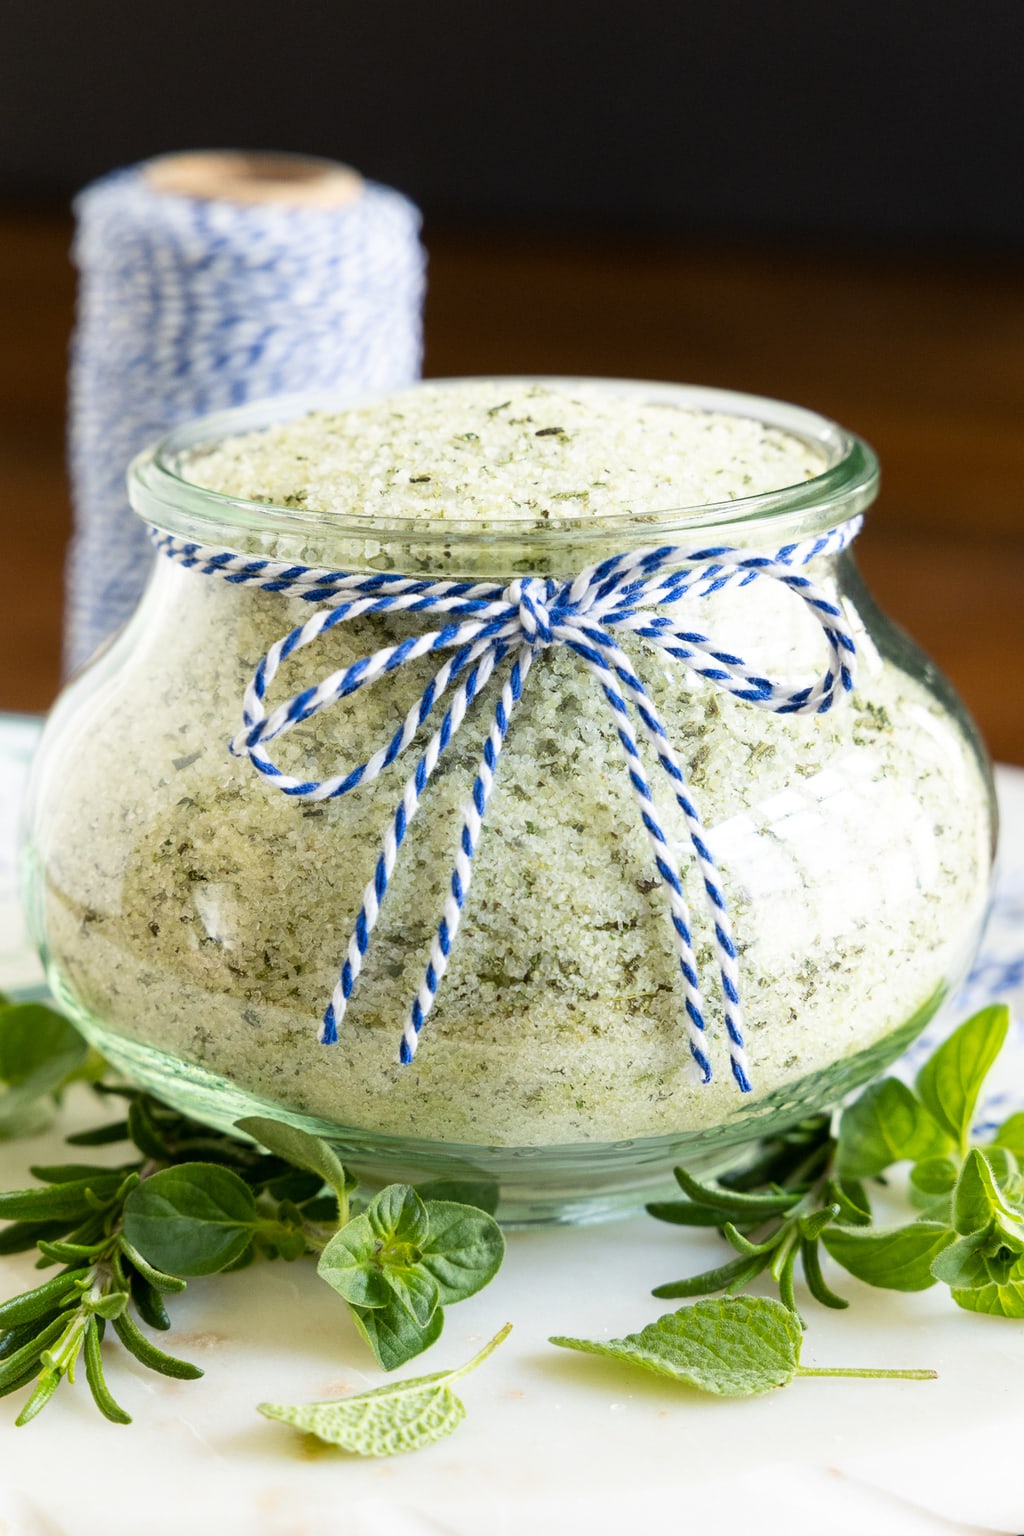 Vertical closeup photo of Tuscan Herbed Sea Salt (Sale alle Erbe) in a Weck glass jar garnished with fresh herbs.